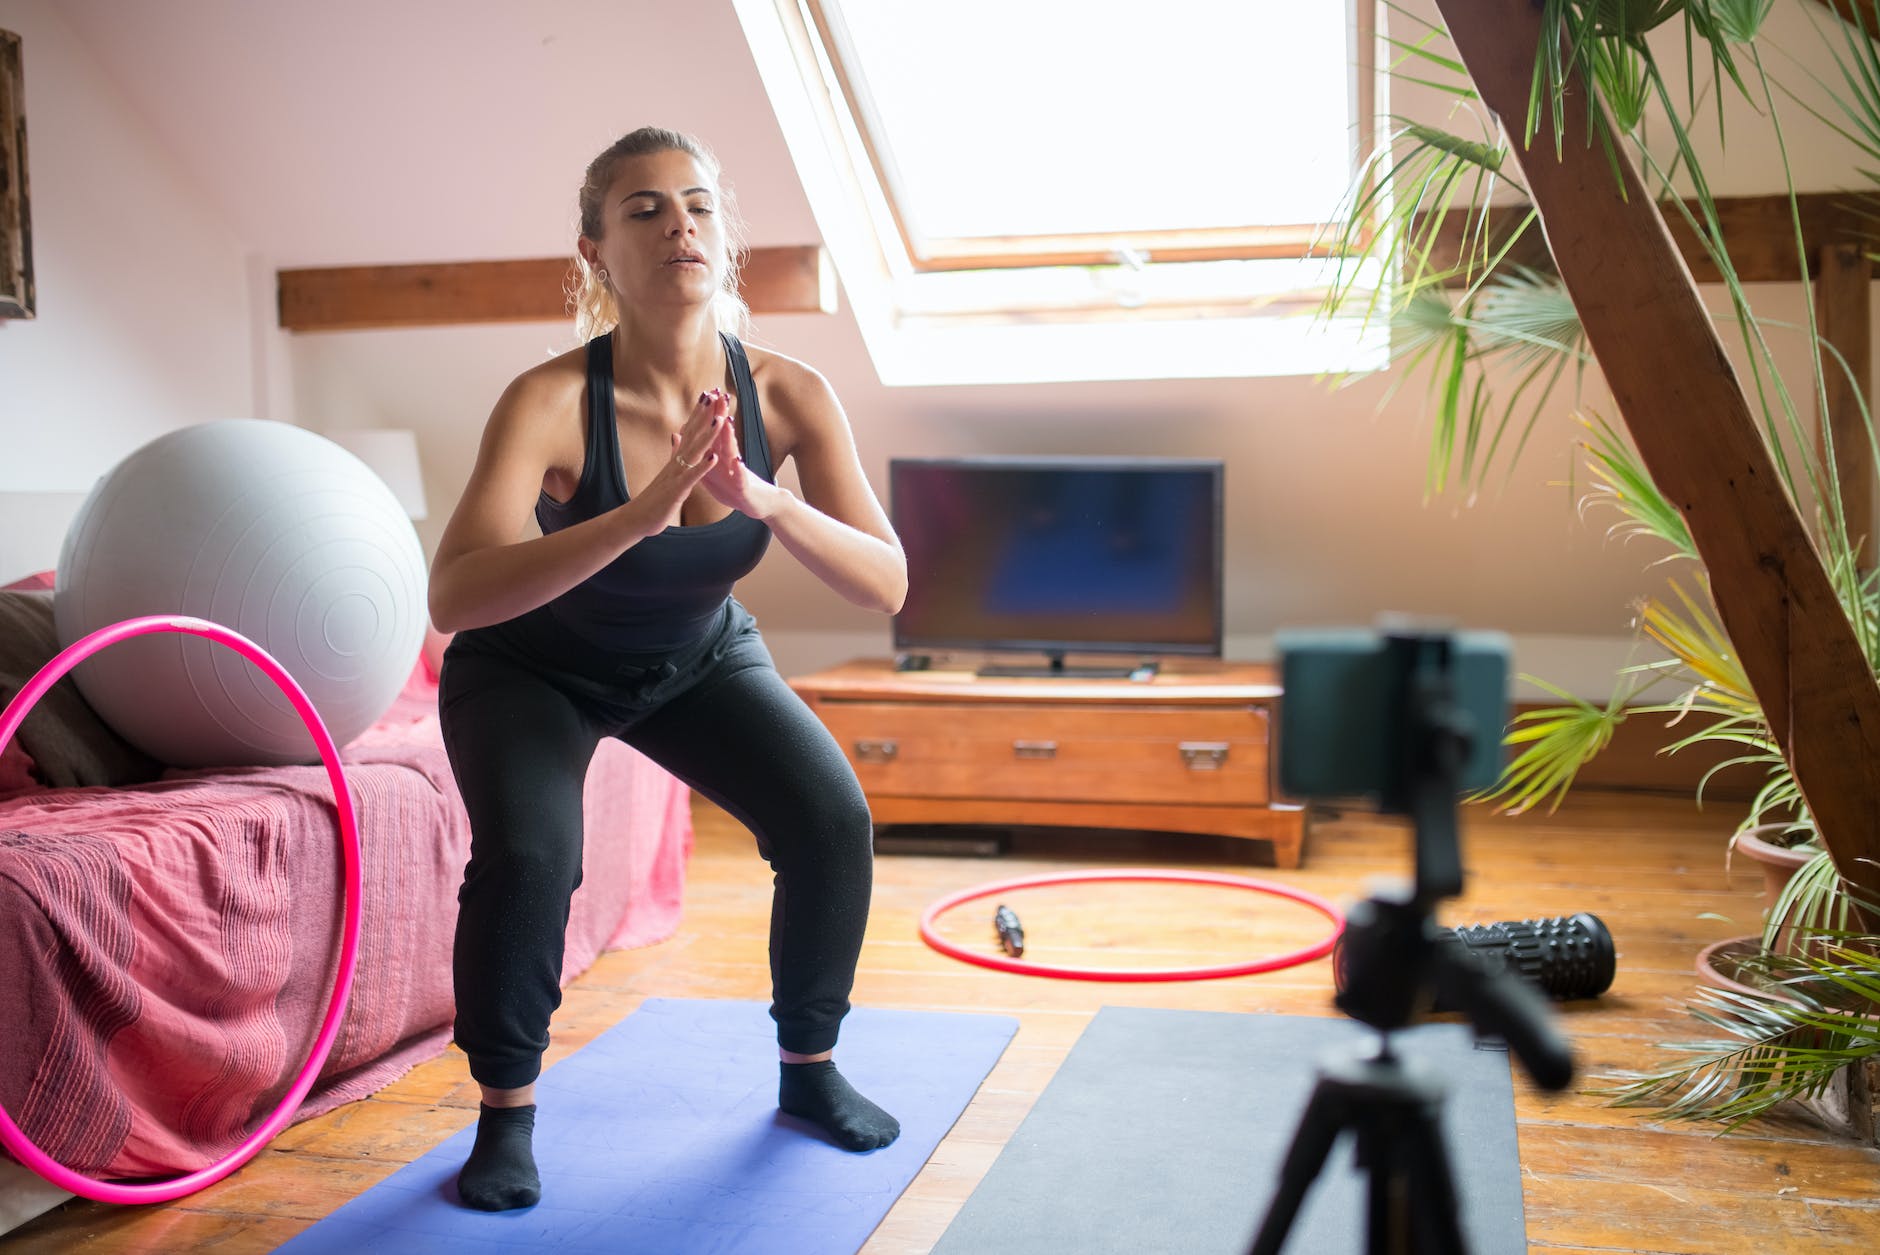 a woman doing exercise while recording herself